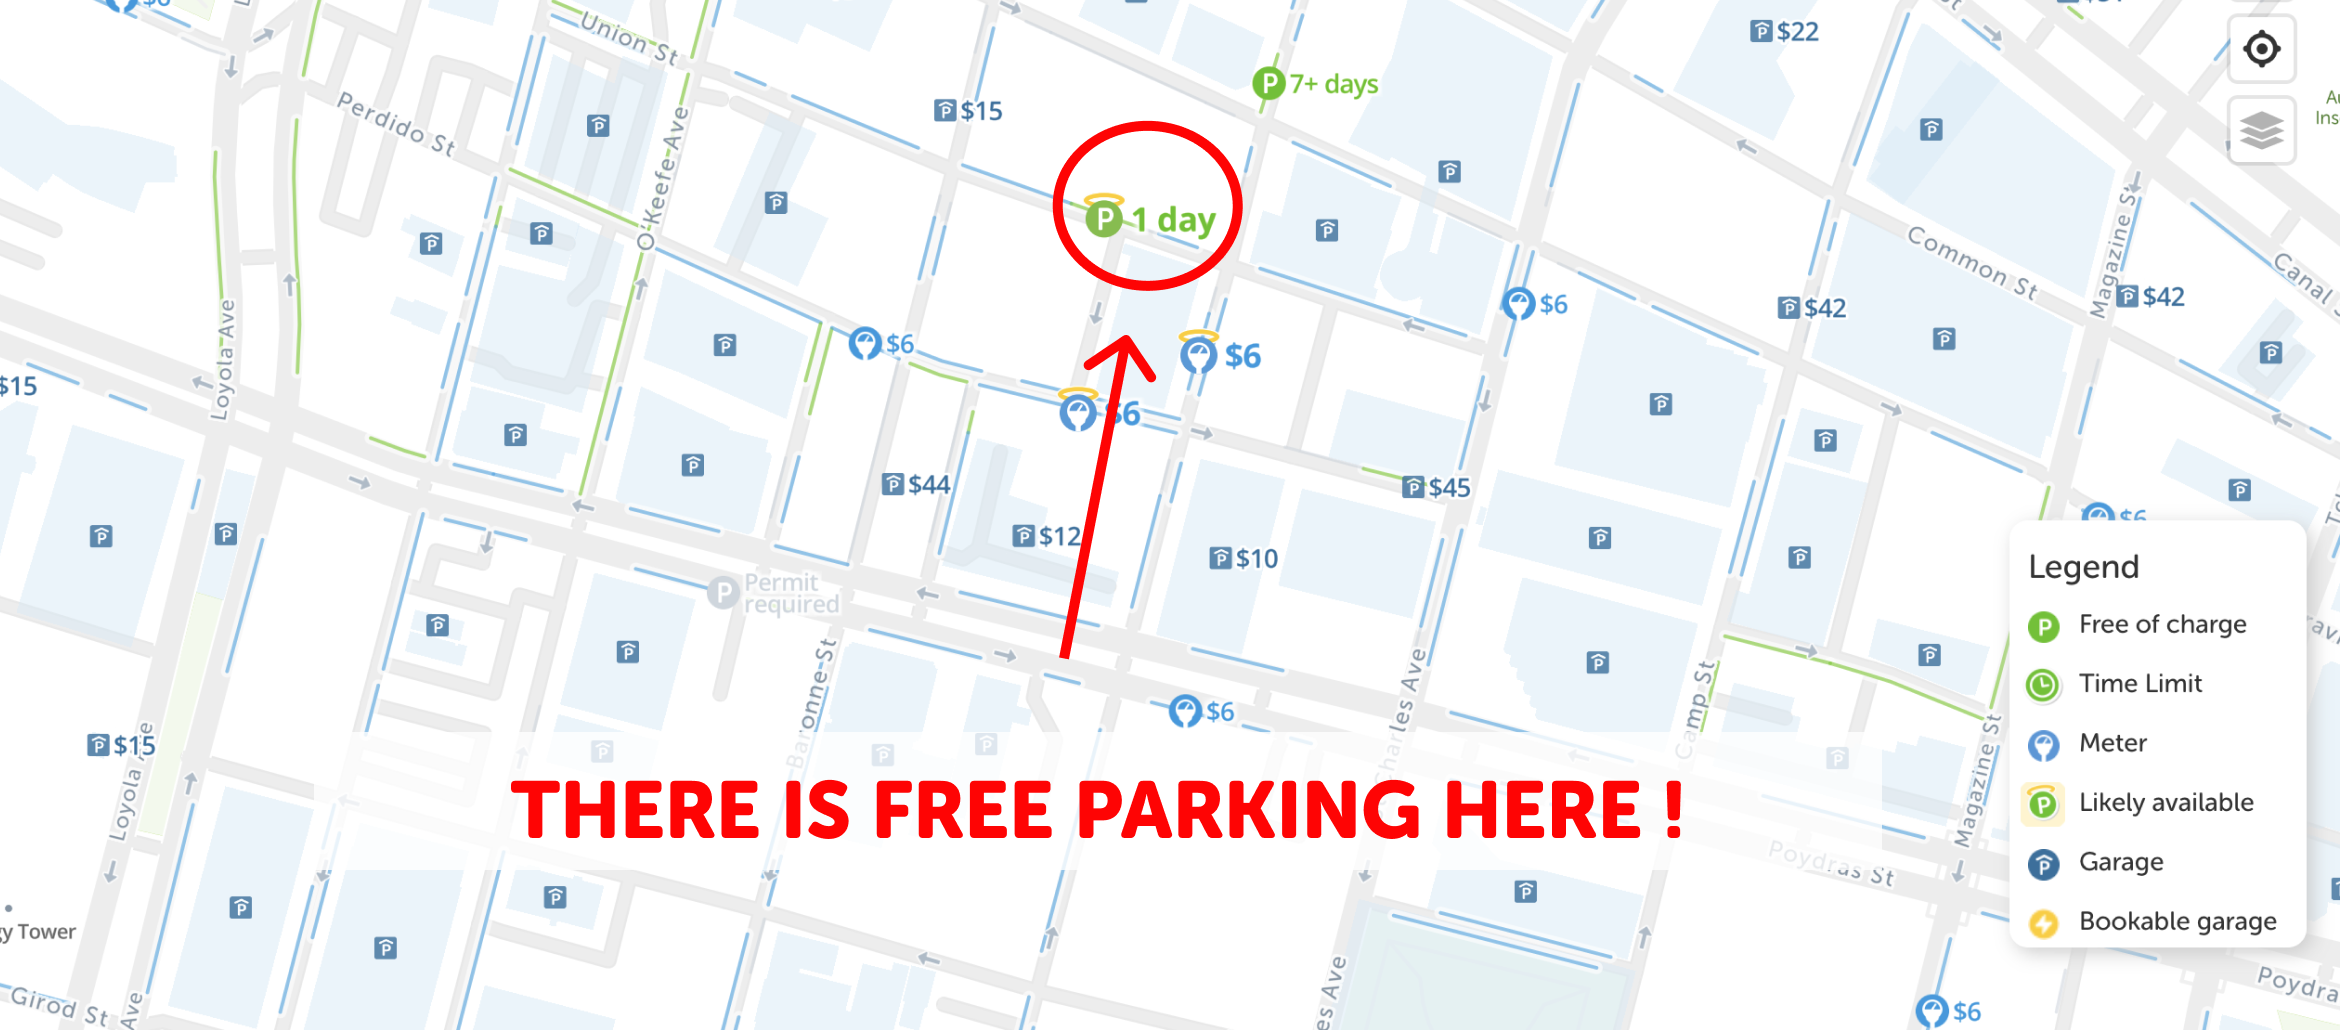 map of free parking in New orleans - SpotAngels